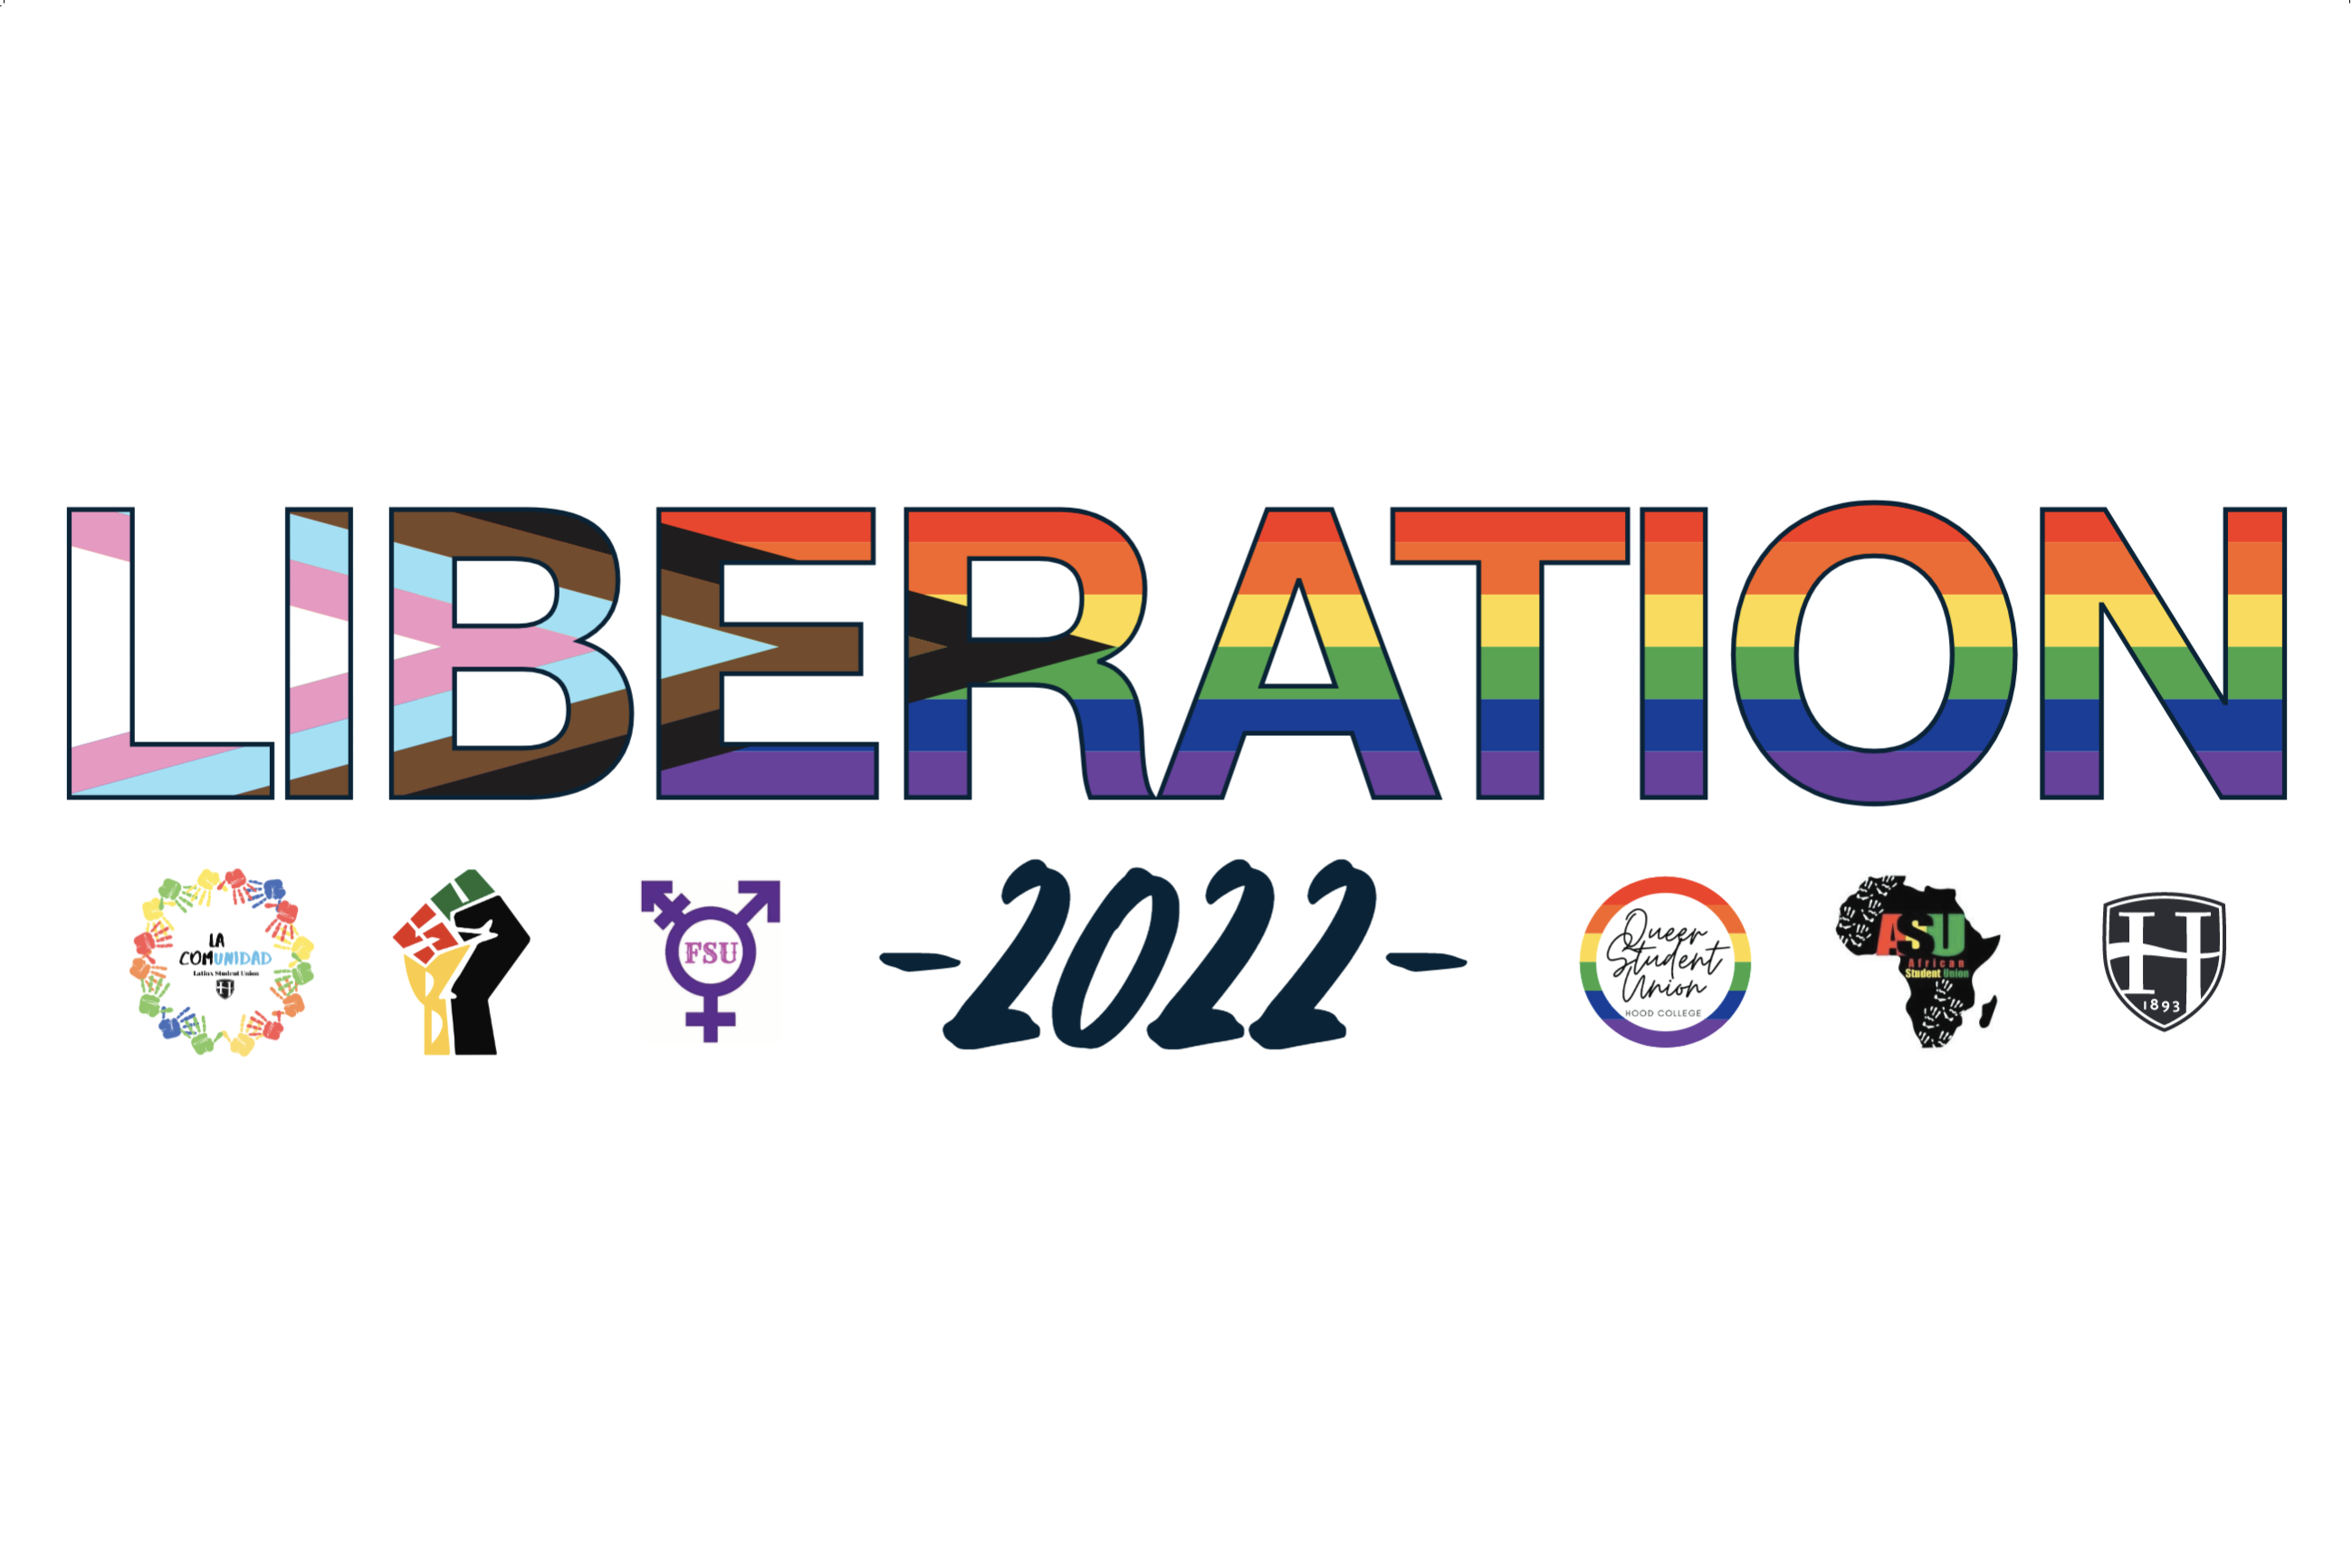 The liberation 2022 banner, featuring the word "Liberation" filled in by a L-G-B-T-Q flag, with logos of student clubs below